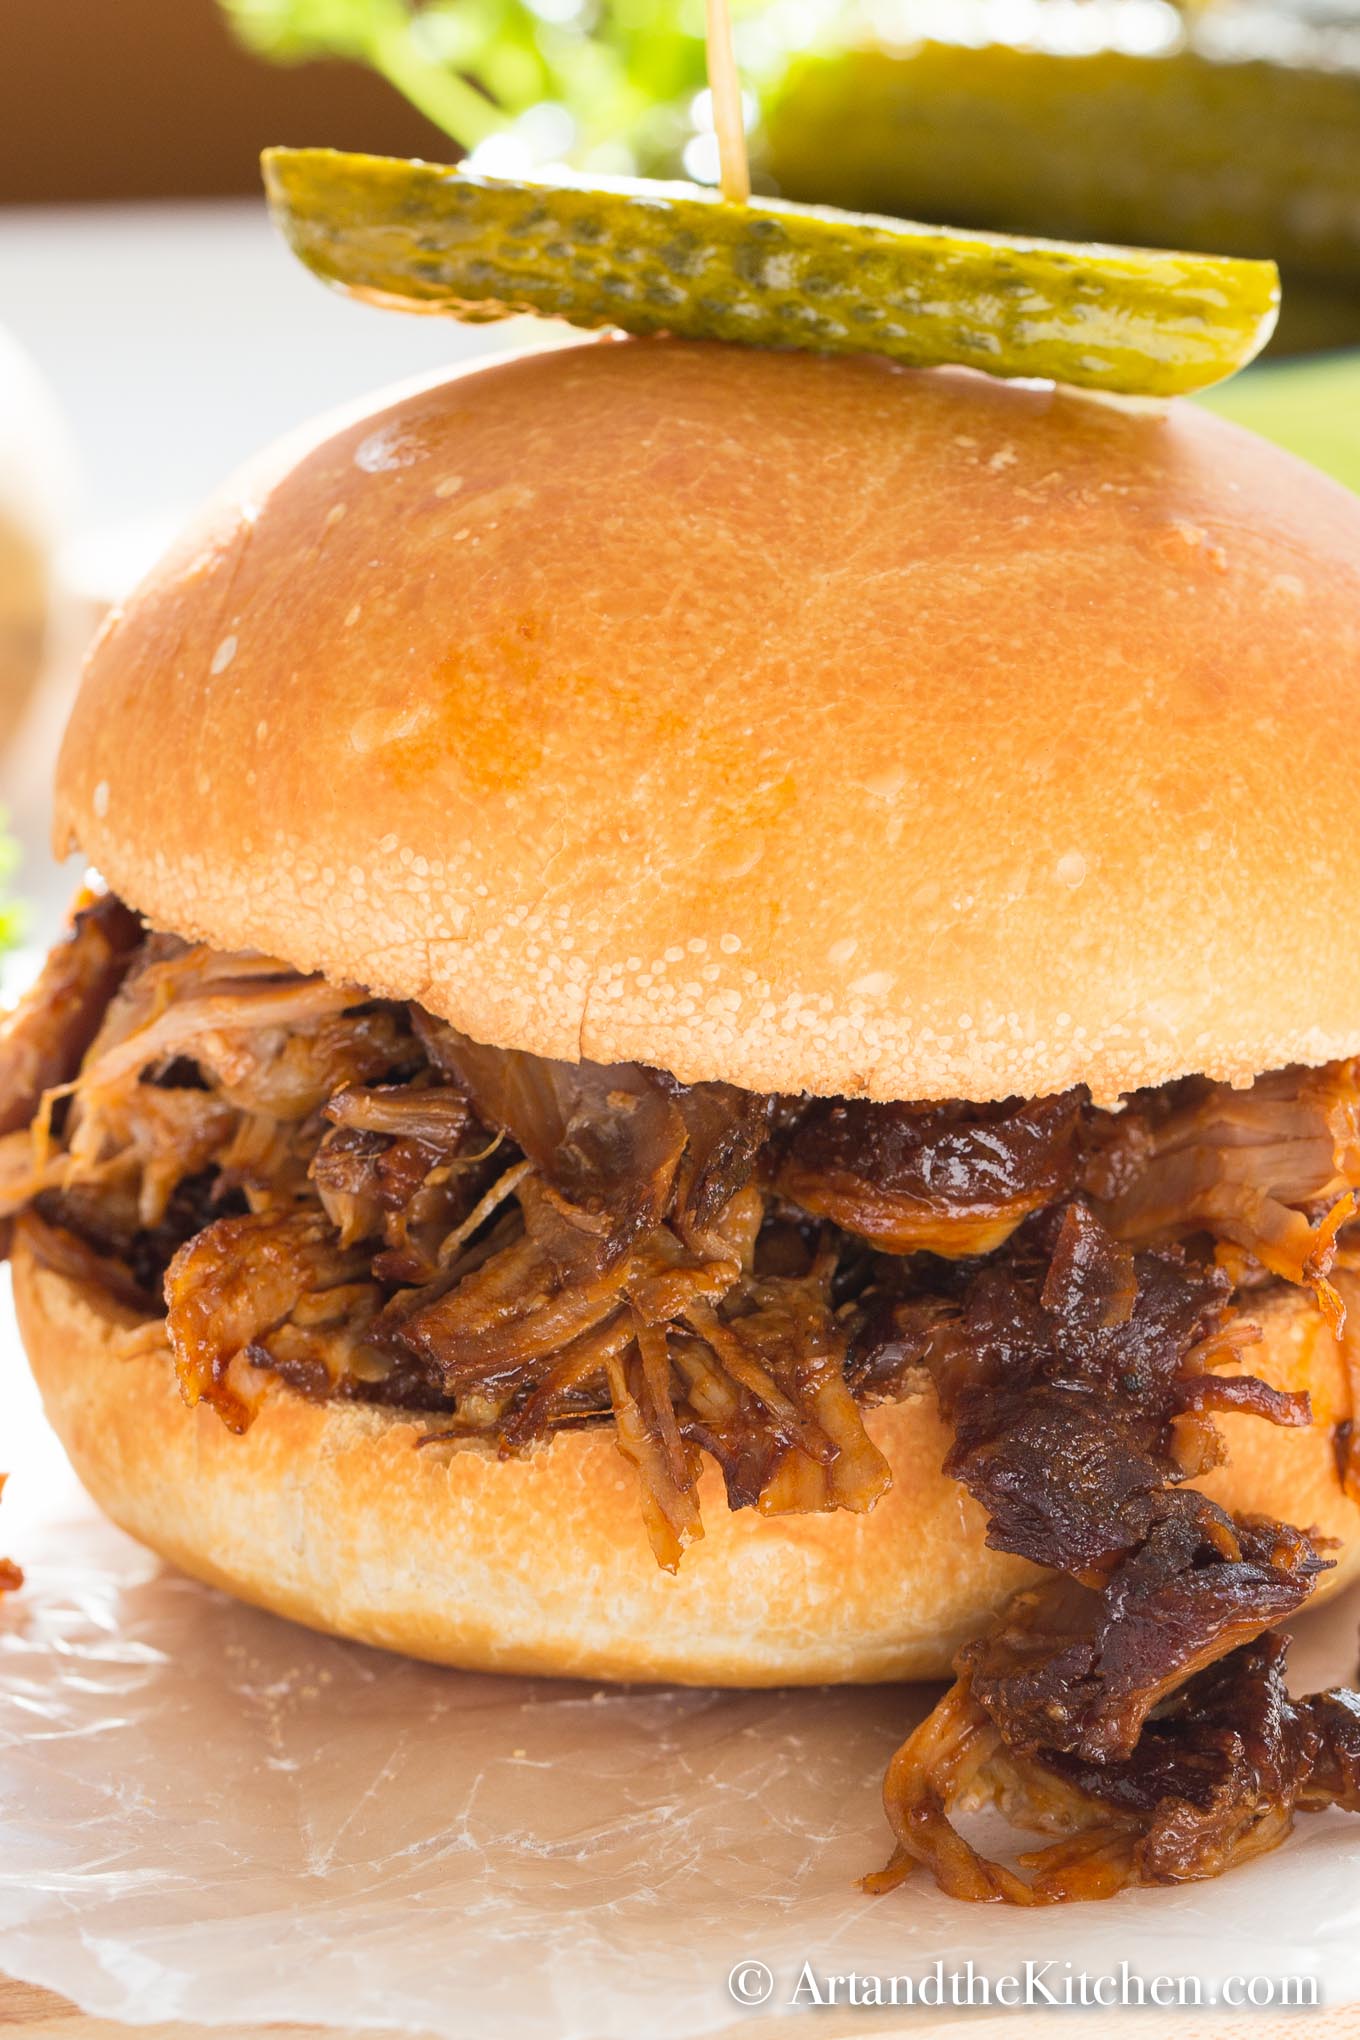 Bun filled with barbecue coated pulled pork, garnished with a dill pickle on top.